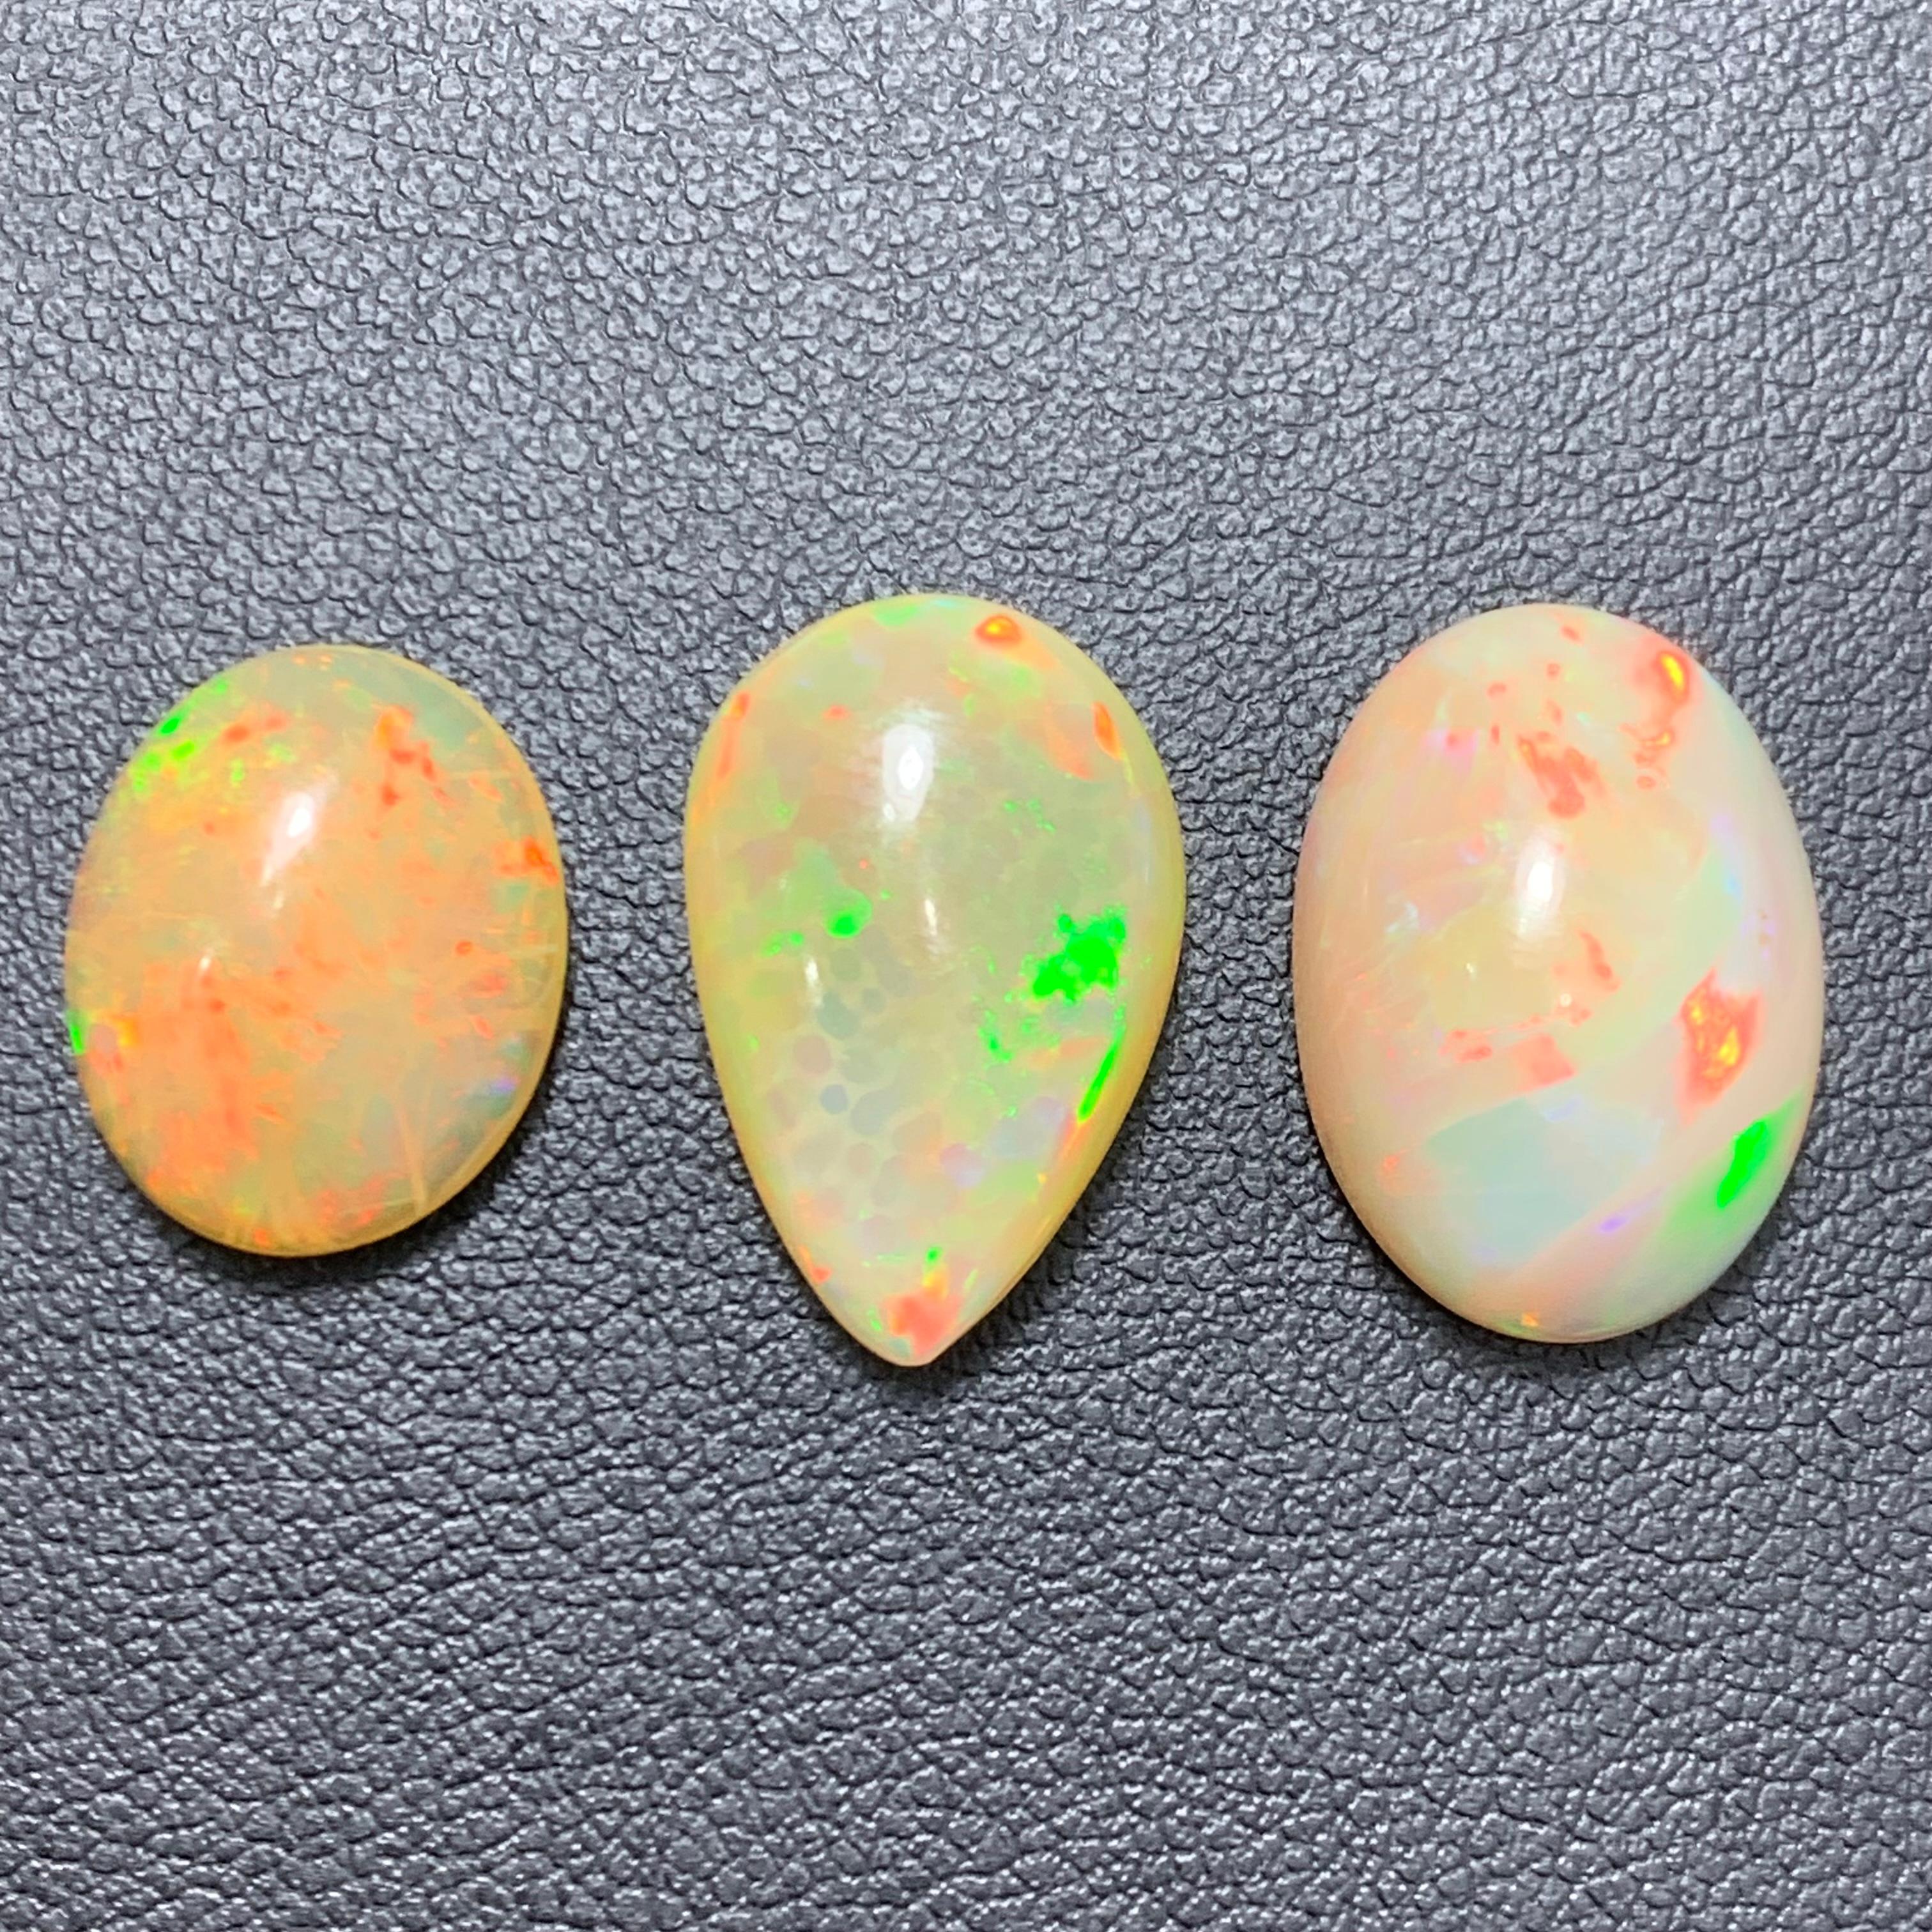 Rare Orange Creamy Natural Fire Opal Gemstone Cabochons, 20 Ct for Jewelry 3